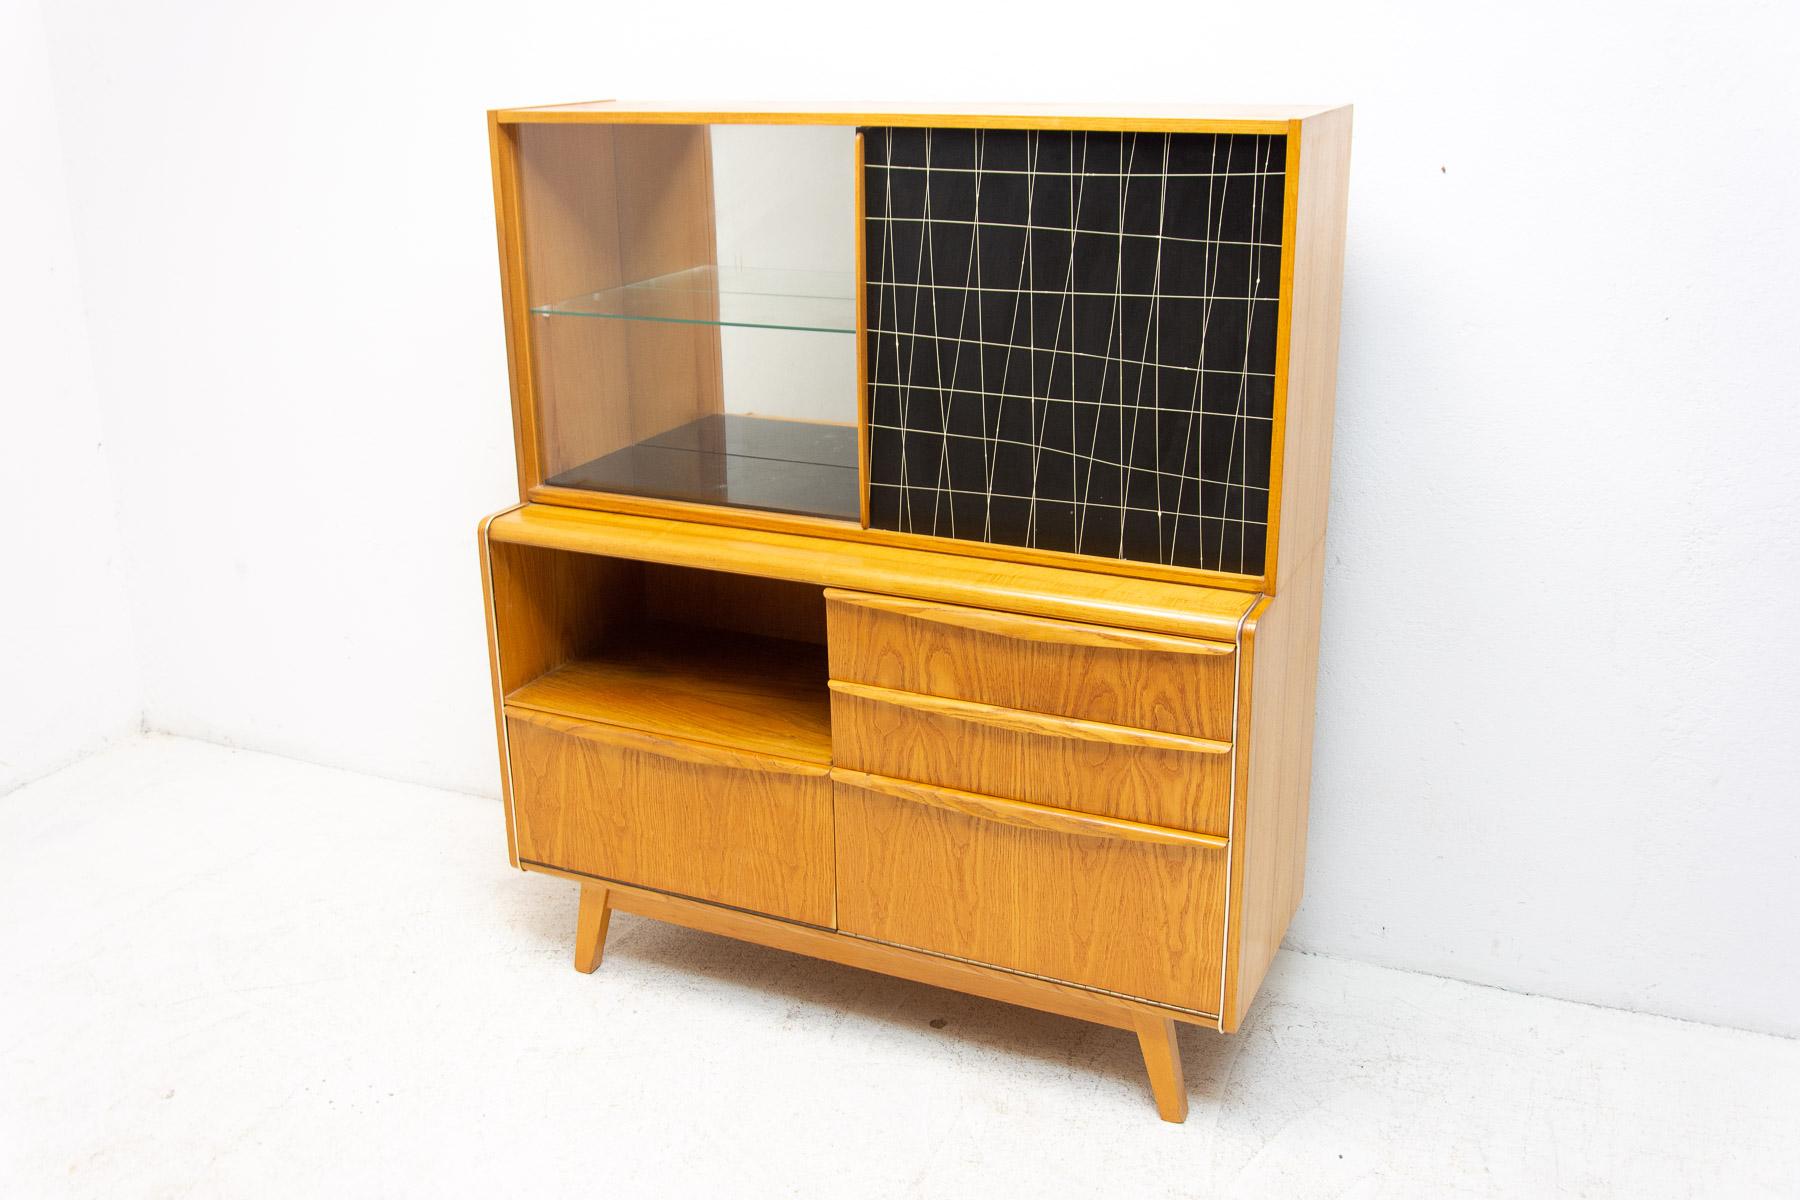 Mid-century credenza/cabinet with bar. It was designed by Hubert Nepožitek & Bohumil Landsman for Jitona company under serial No. U-300 in the 1960´s. It features a glazed upper section with glass shelf to the left and laminated doors to the right,